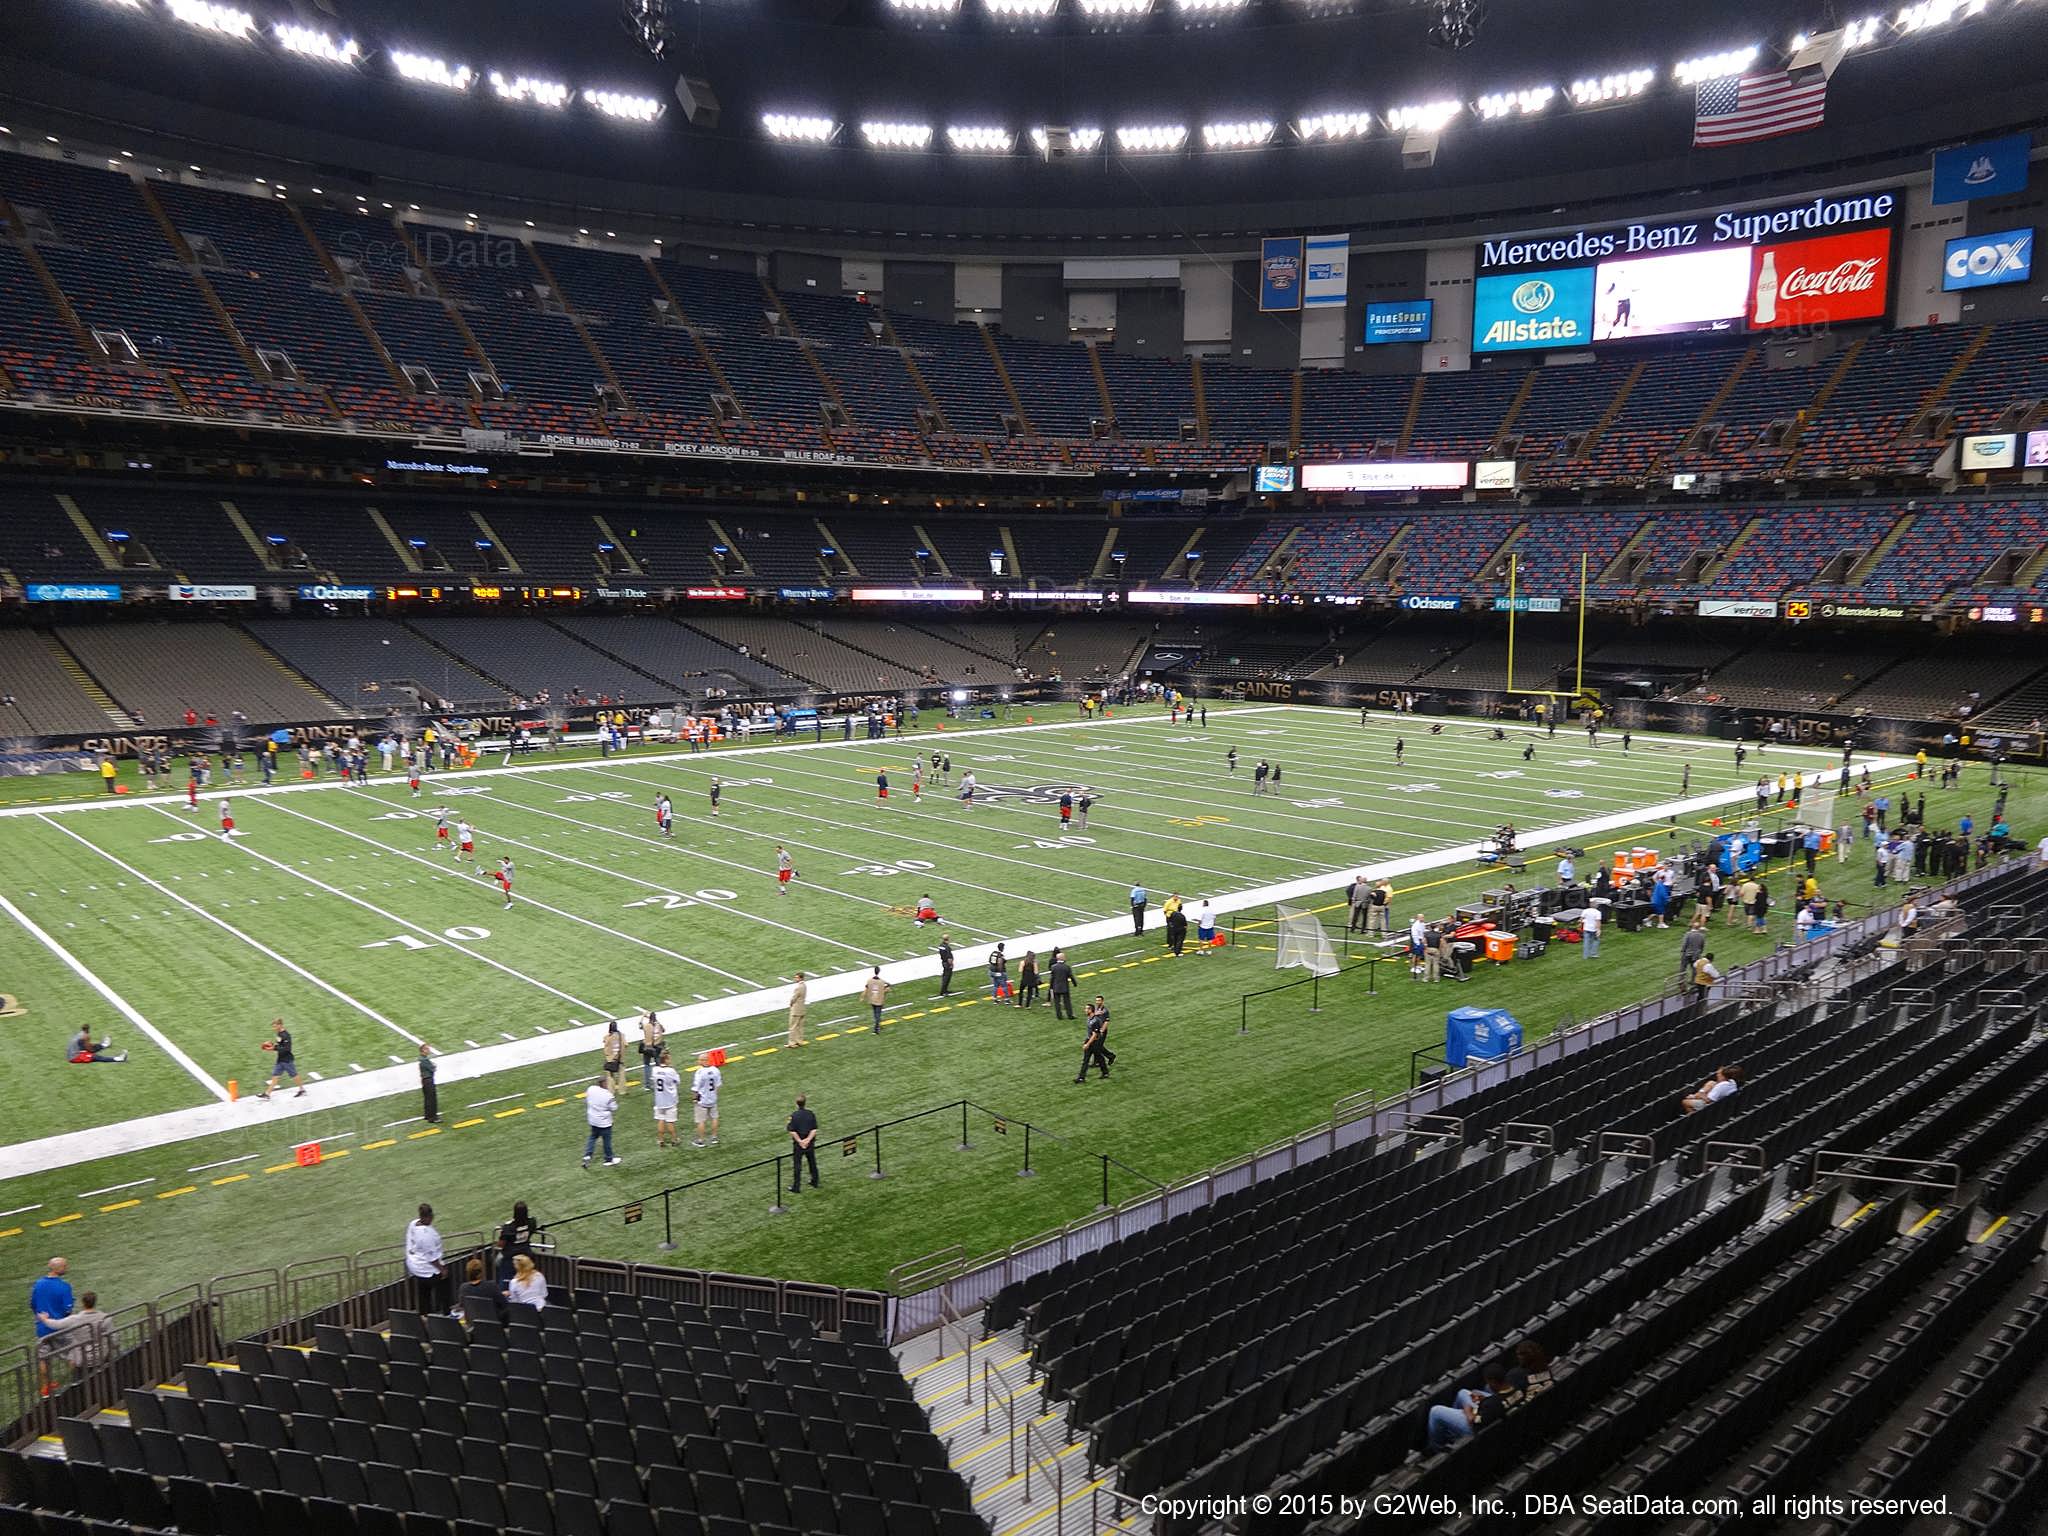 Seat view from section 273 at the Mercedes-Benz Superdome, home of the New Orleans Saints